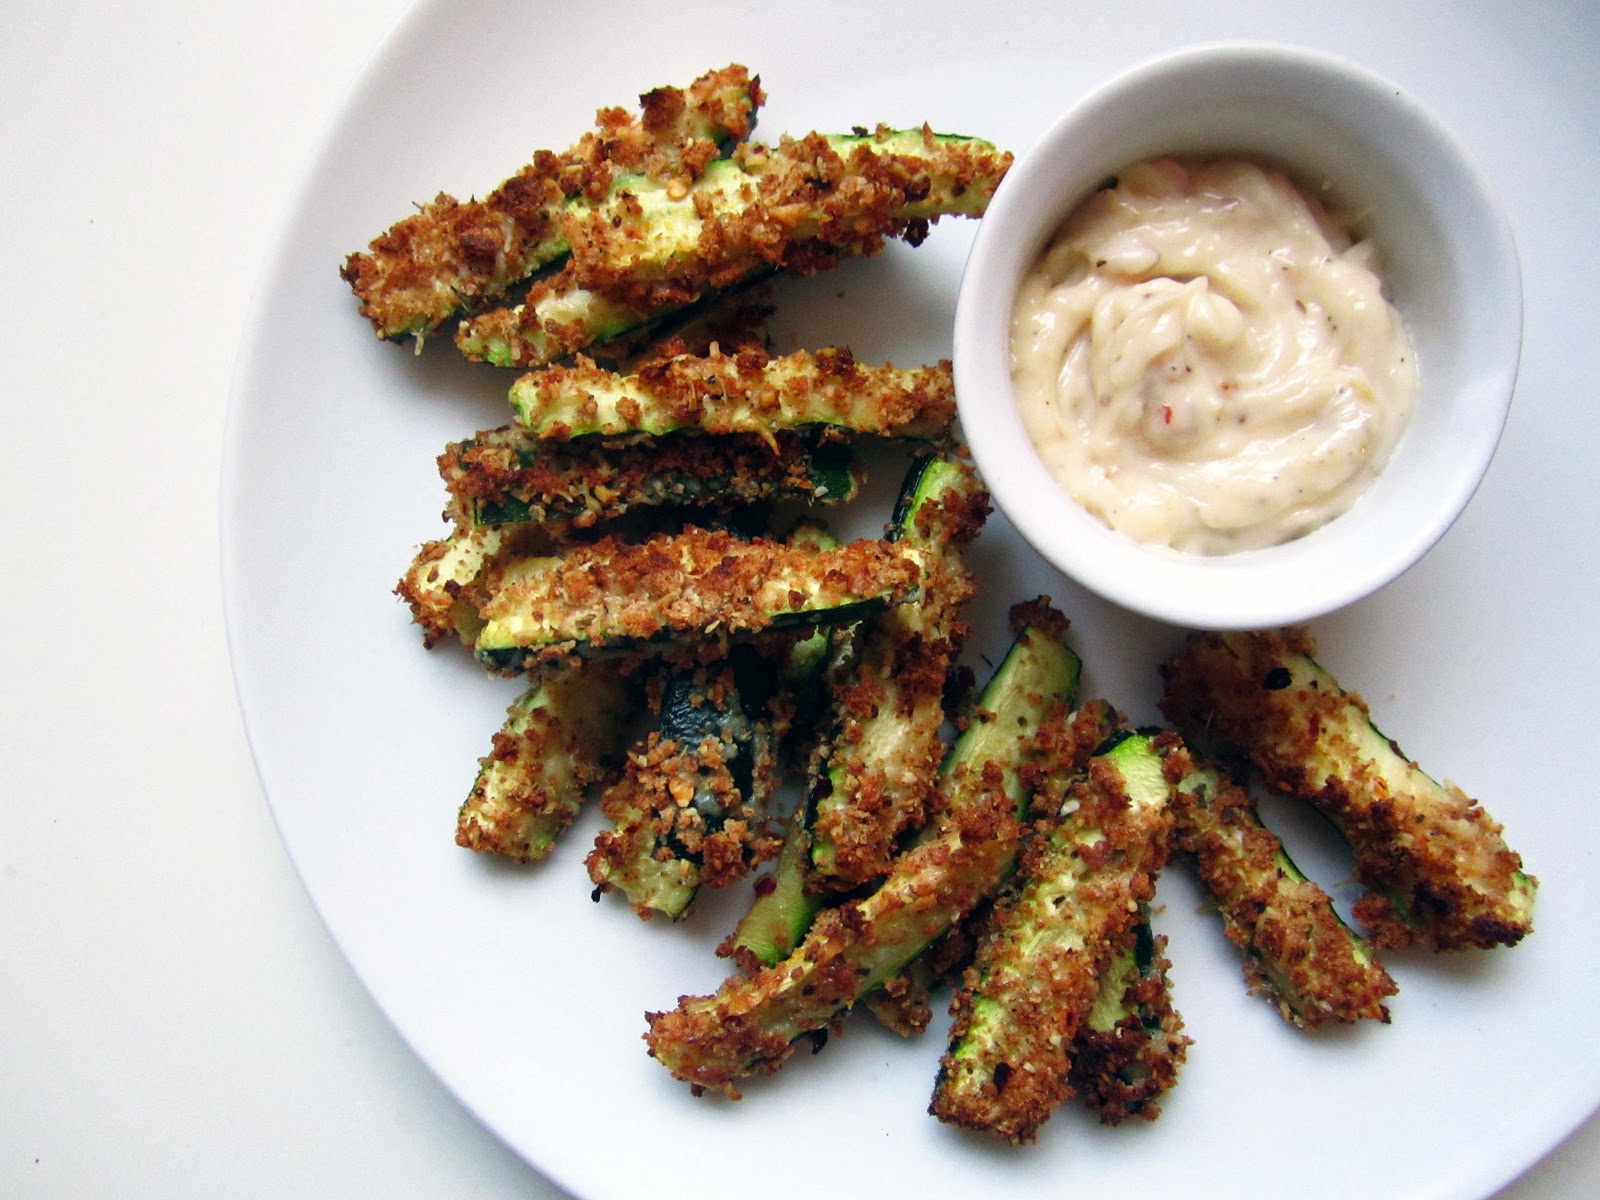 I’m Sorry to Make You Feel Old, But Only Millennials Have Eaten at Least 9/17 of These Foods 8 courgette fries